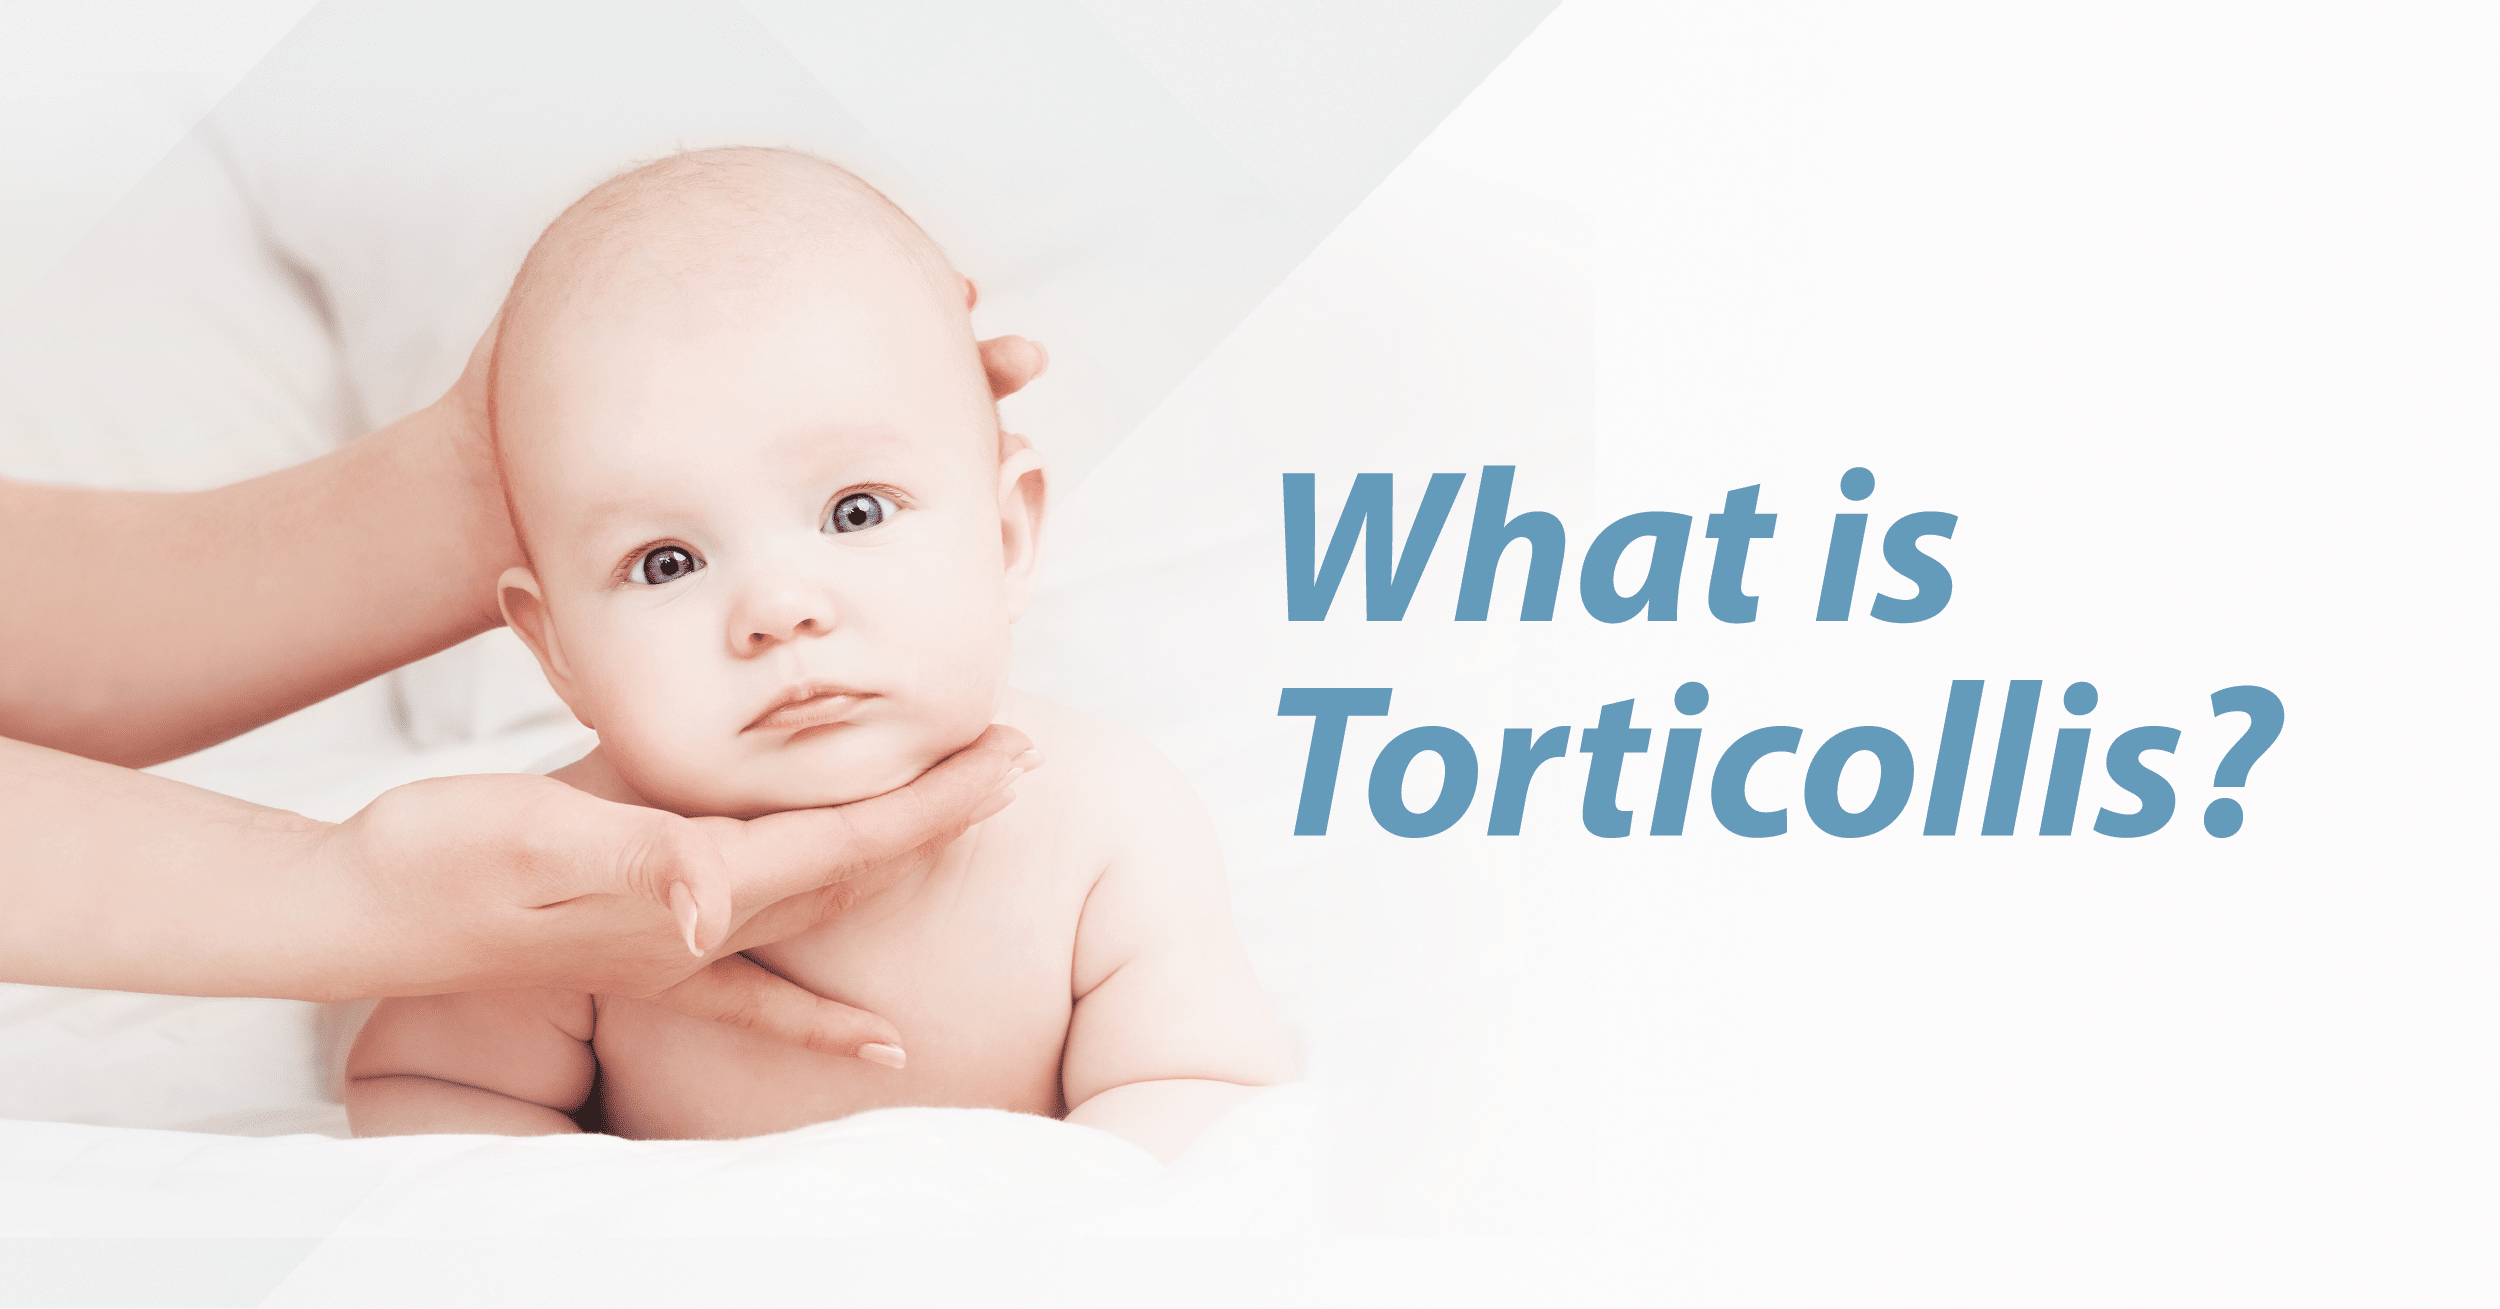 How To Treat Torticollis In Adults